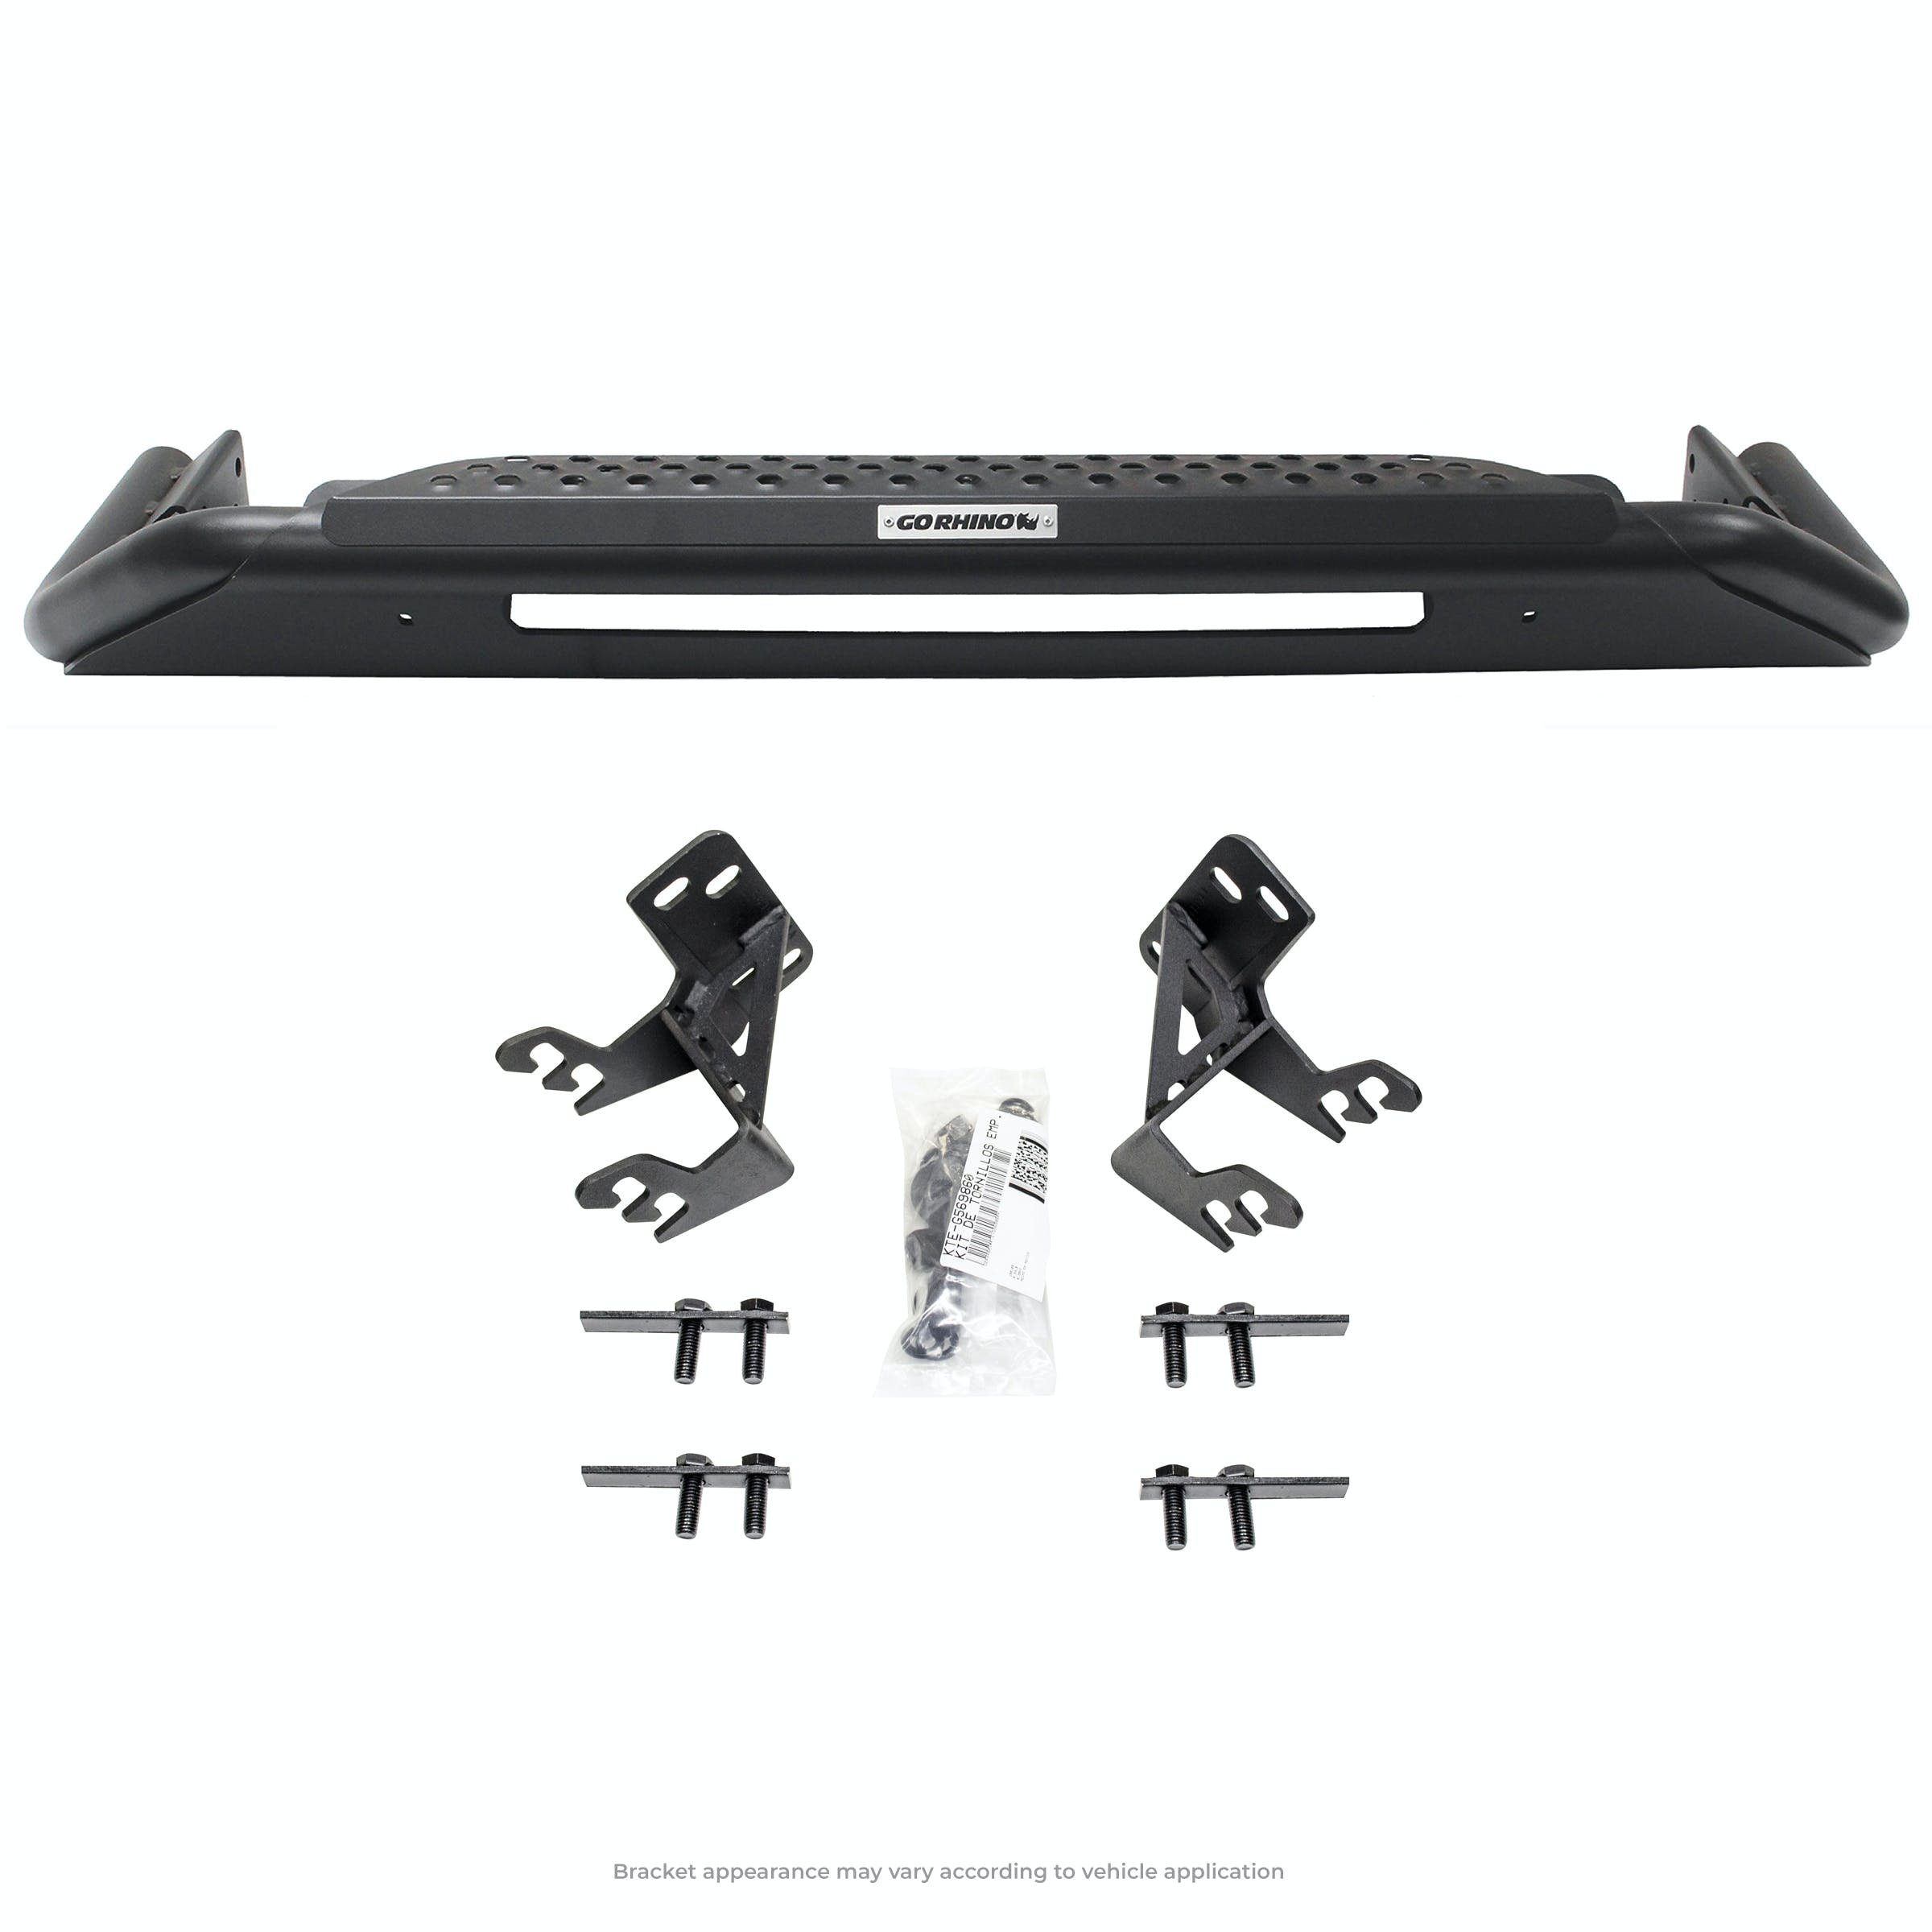 Go Rhino 565660T RC3 LR - Complete kit: Front guard + Brackets